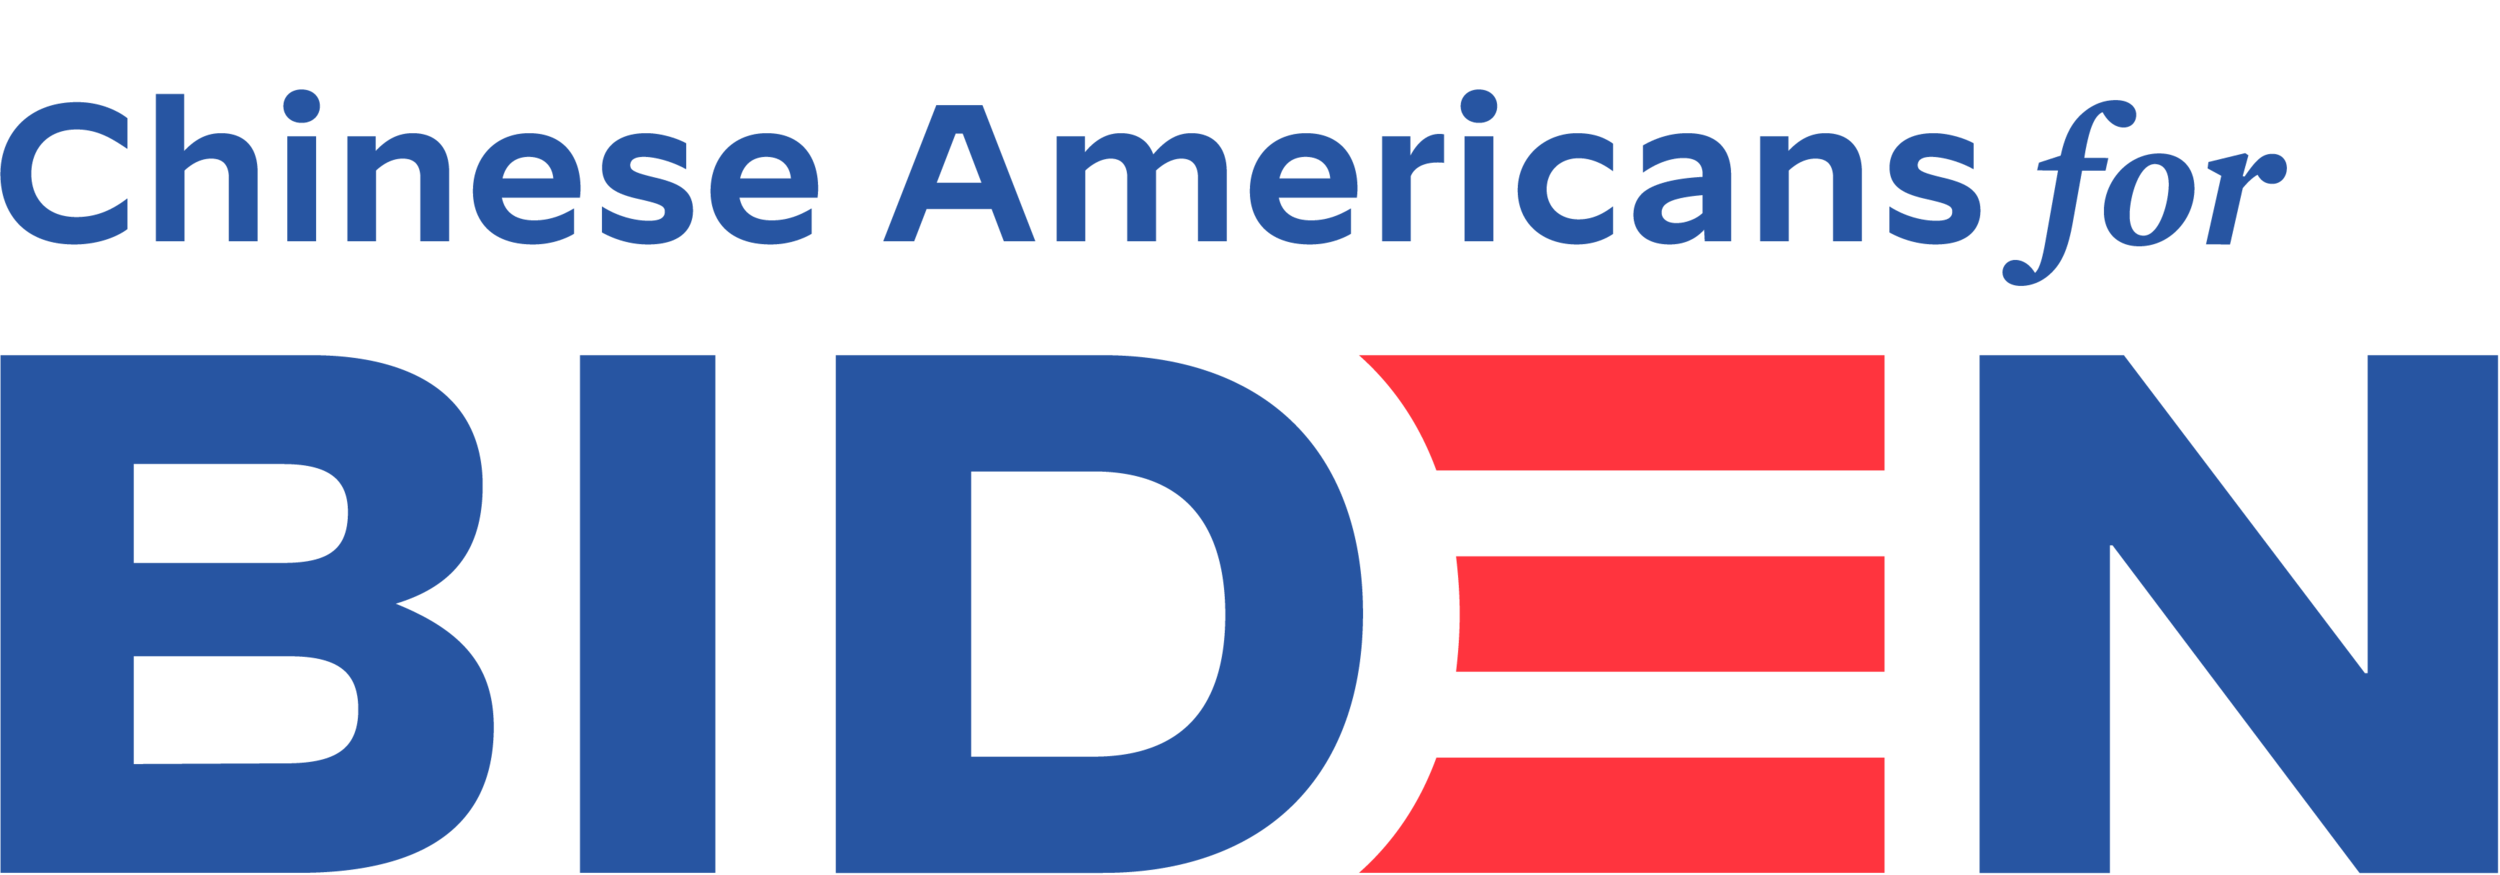 Chinese Americans for BIDEN_logo_0820_Union Blue.png